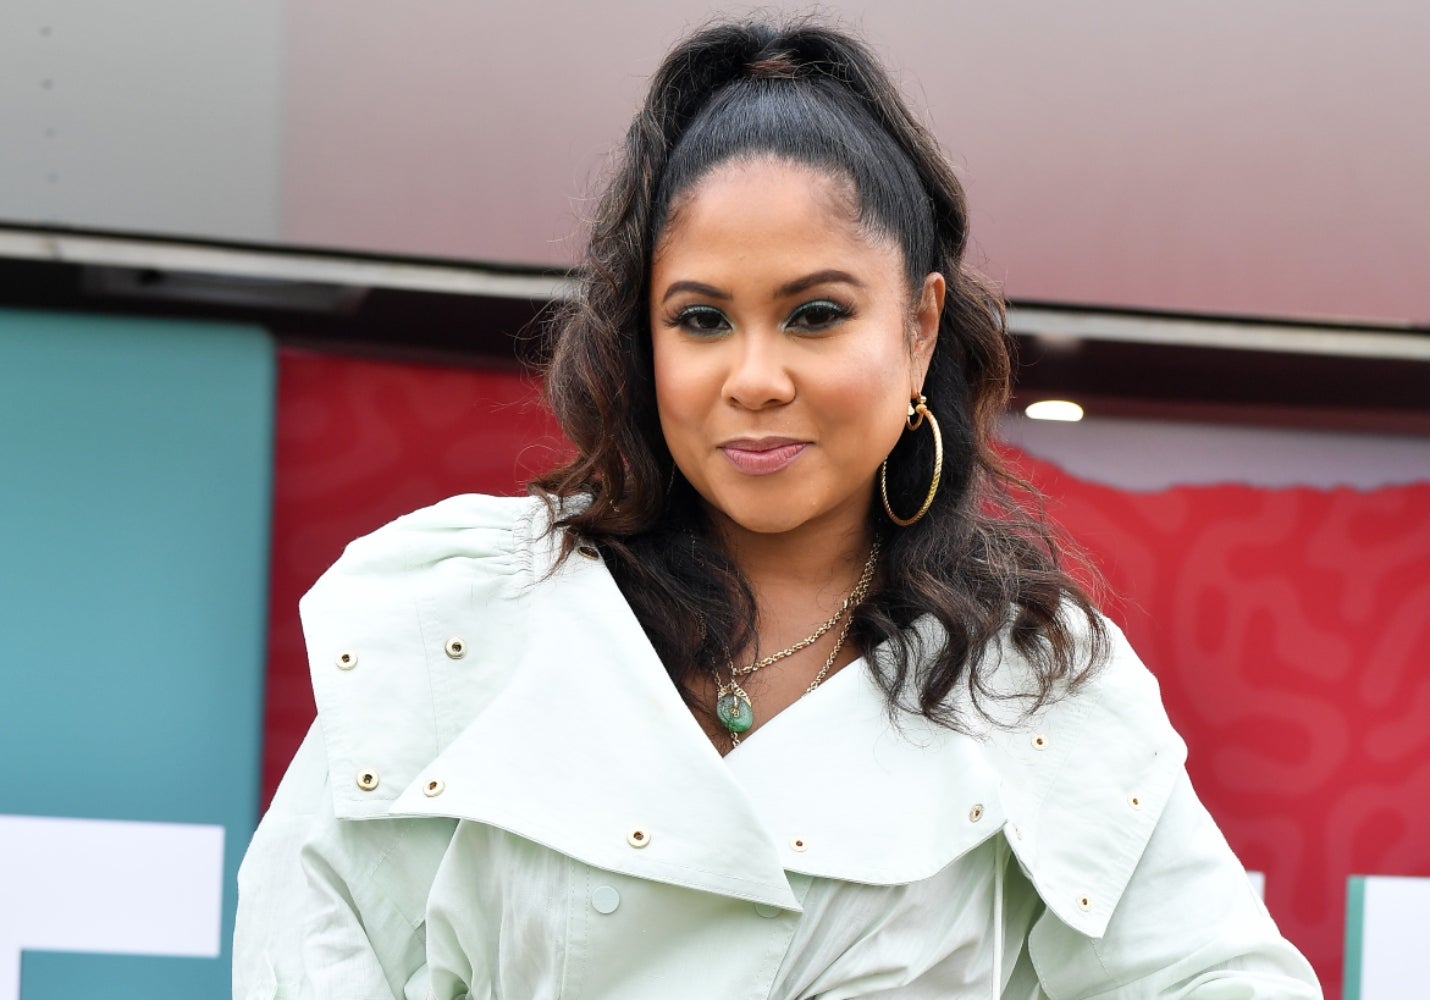 A High Cholesterol Scare Motivated Angela Yee To Get Serious About Heart Health